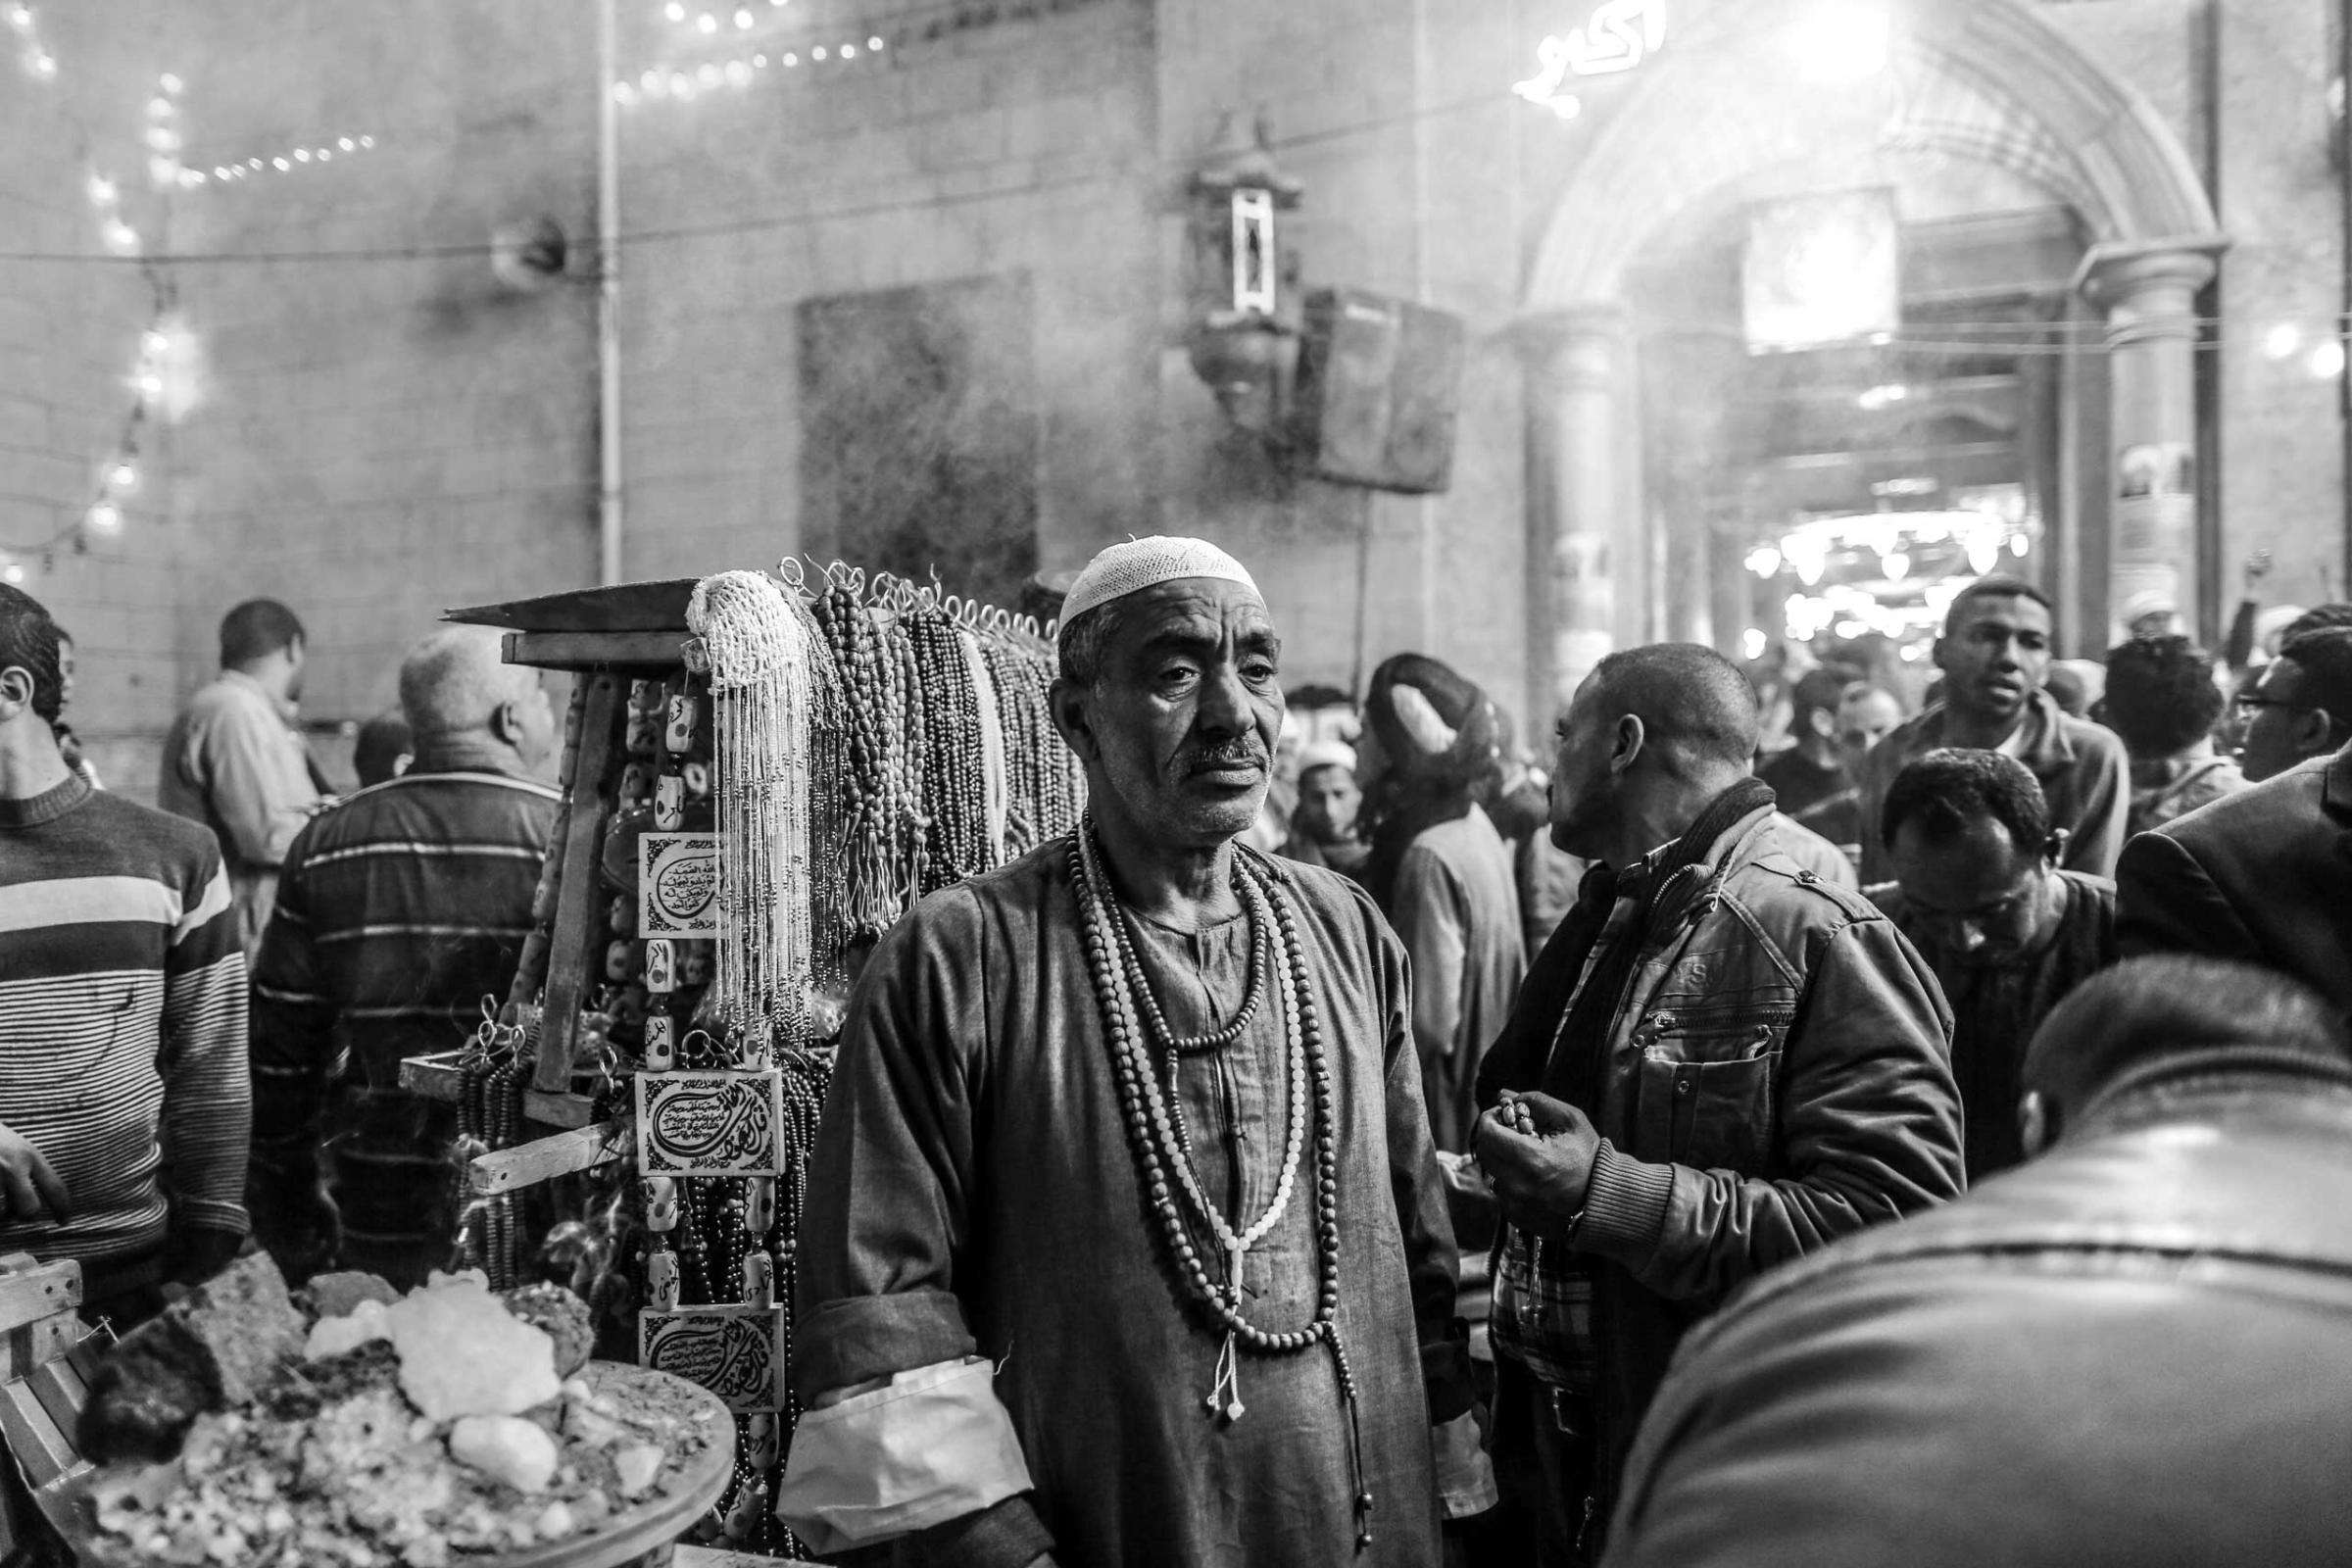 A merchant stands the mosque of Al-Hussein, the grand son of the prophet, in downtown Cairo. Feb. 25, 2014.